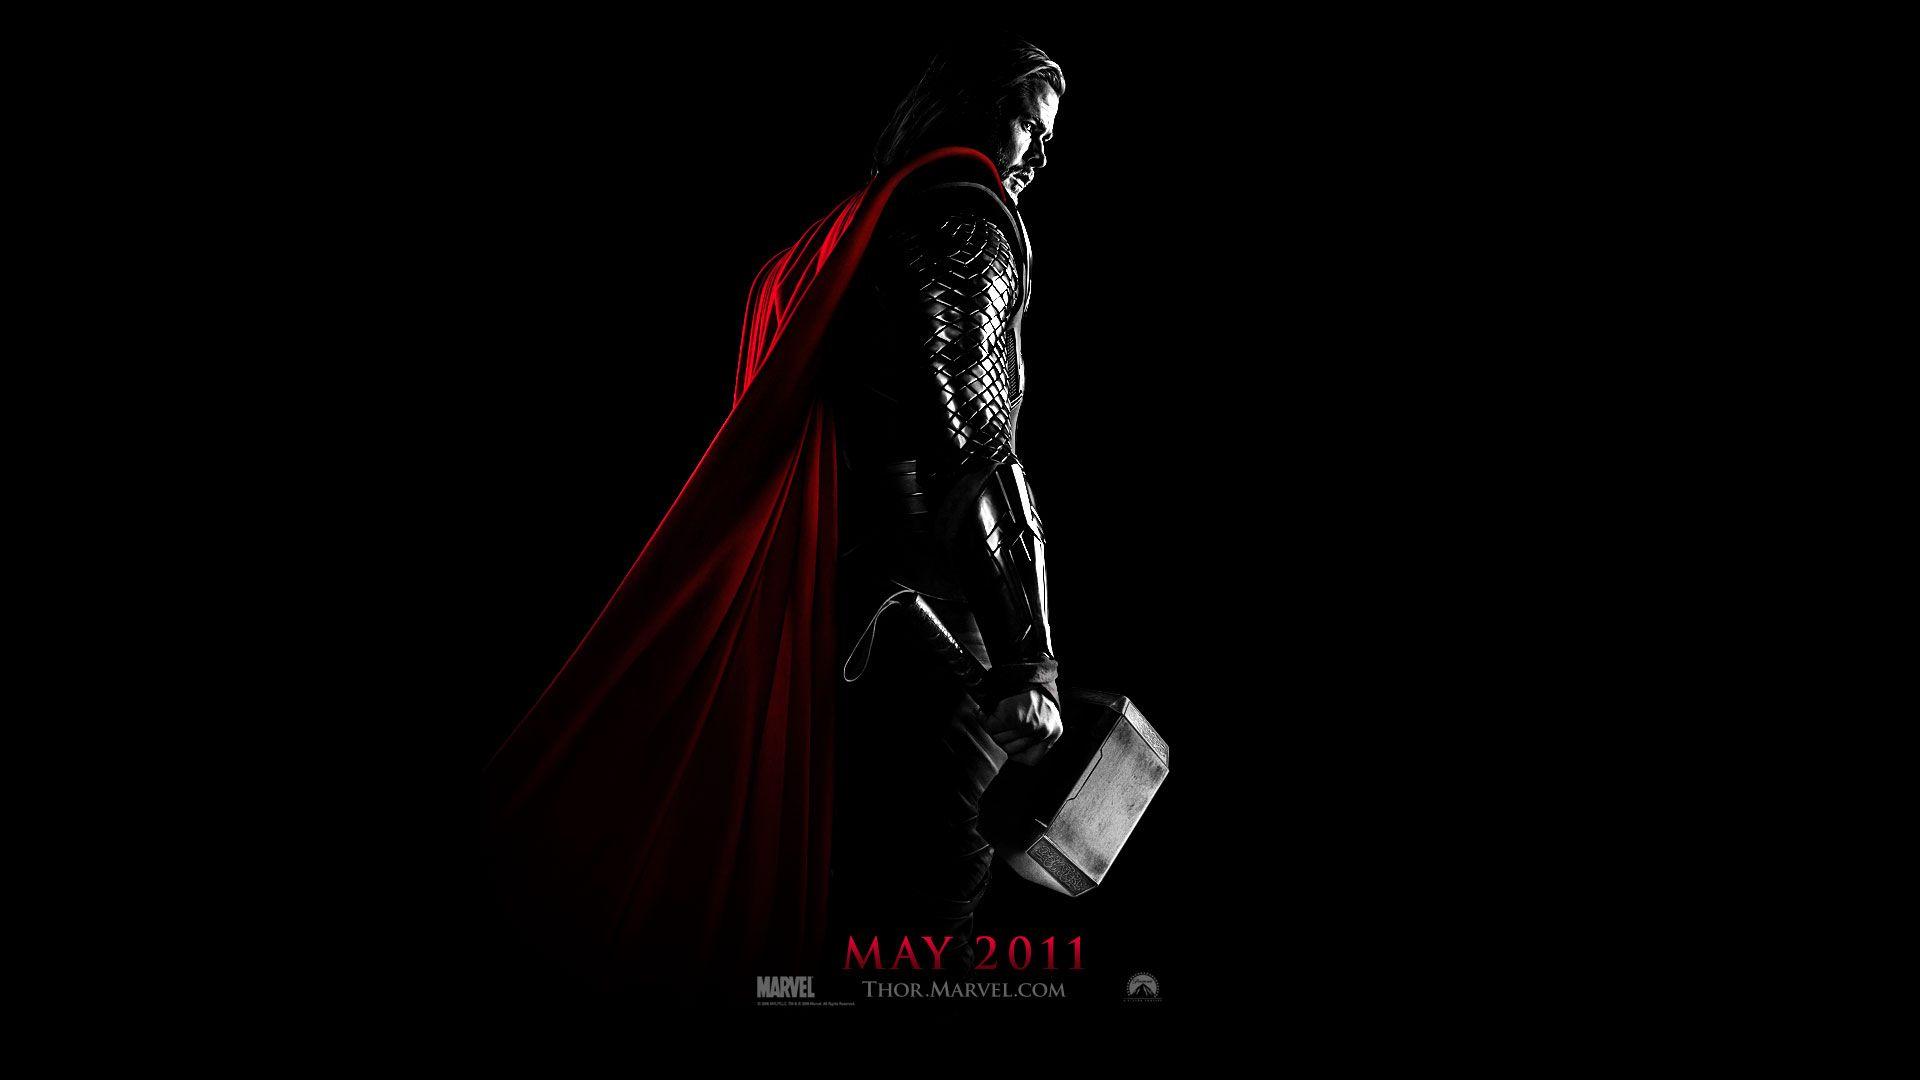 Thor. Free Desktop Wallpaper for Widescreen, HD and Mobile